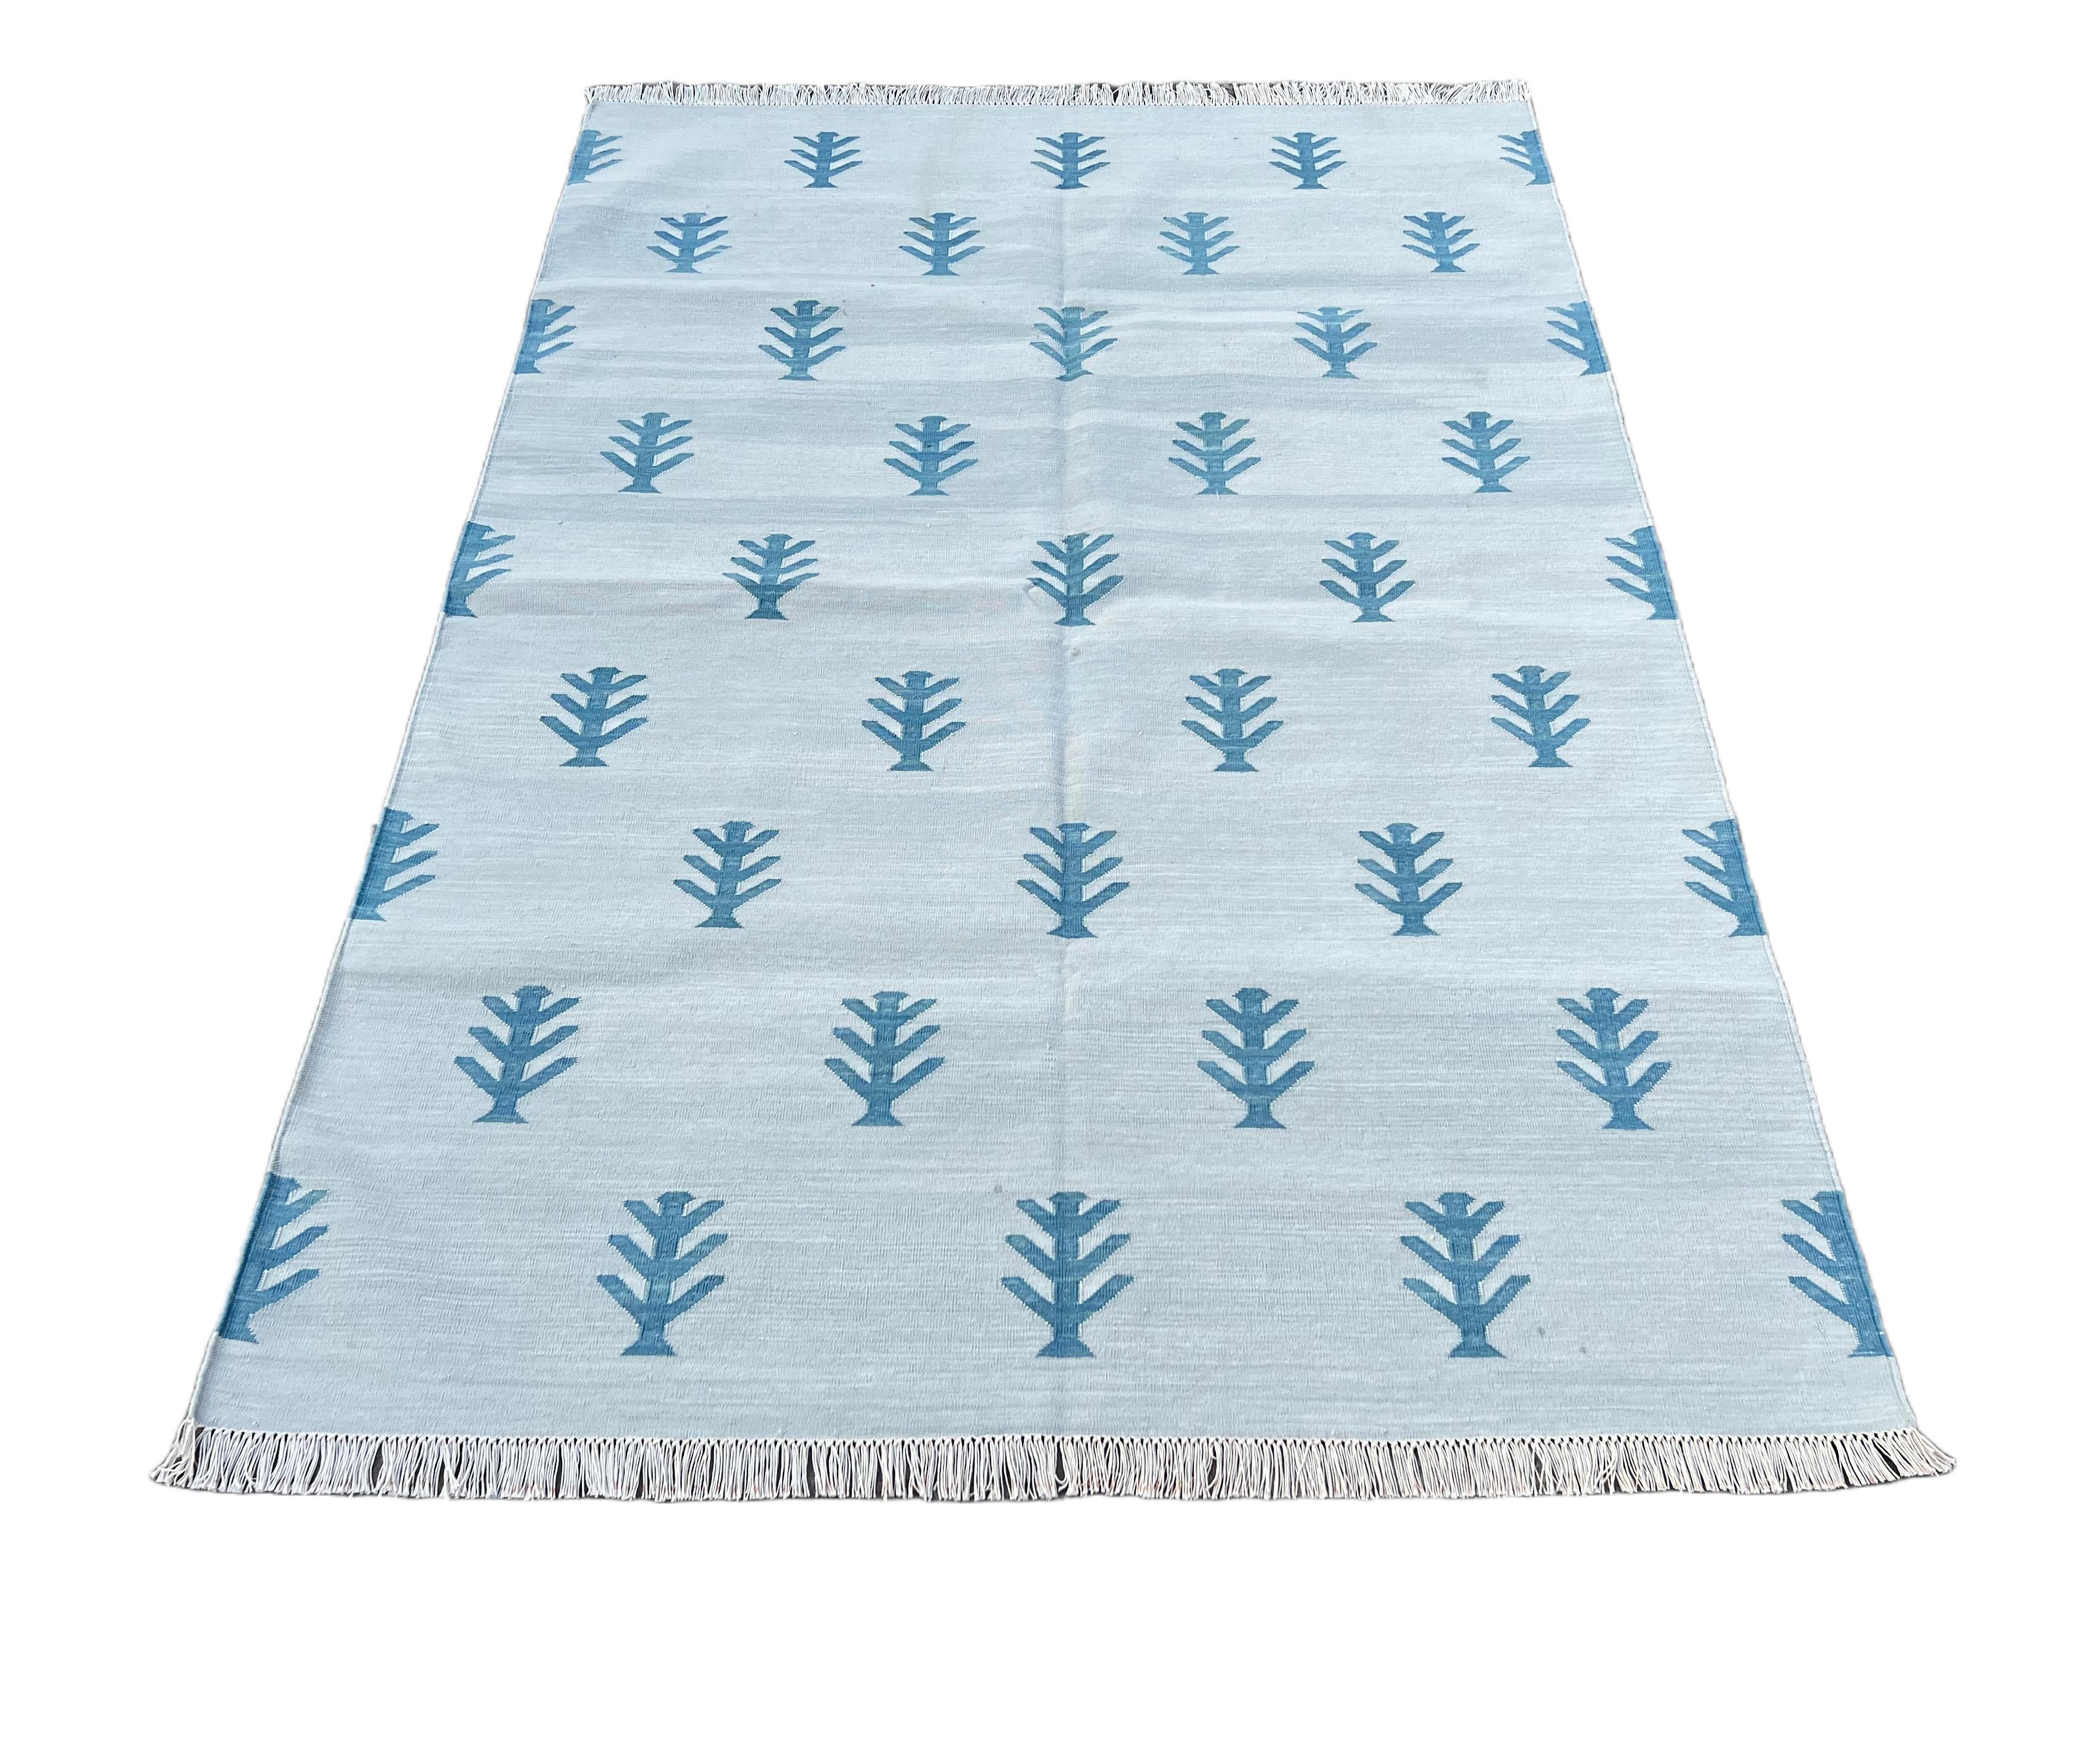 Handmade Cotton Area Flat Weave Rug, Grey & White Tree Patterned Indian Dhurrie For Sale 3